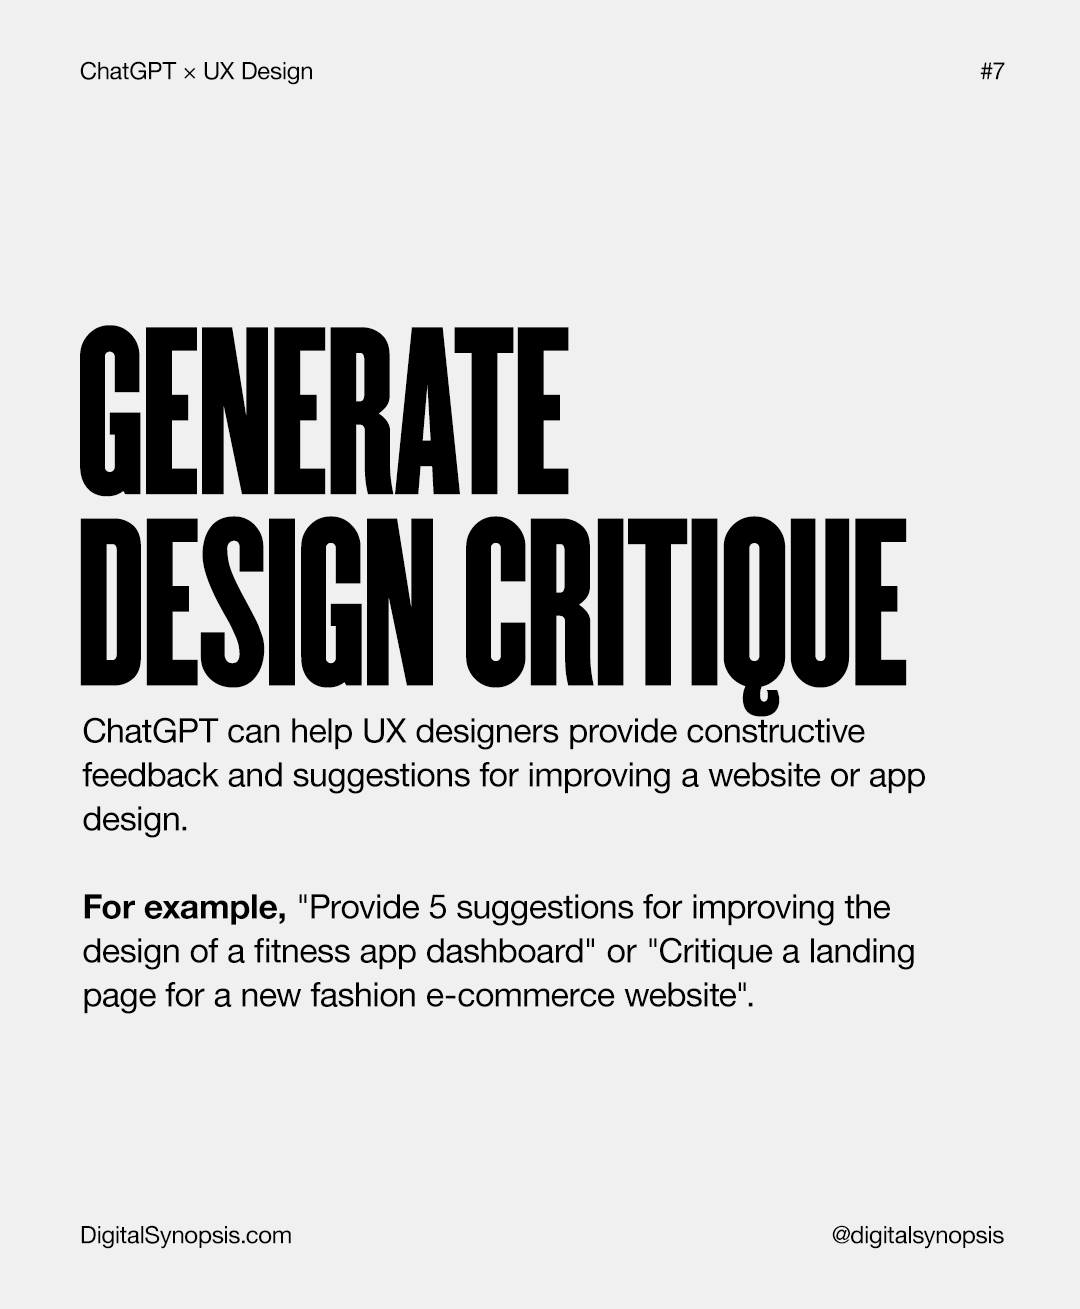 Top 10 Ways To Use ChatGPT For UX Design - Generate Design Critique